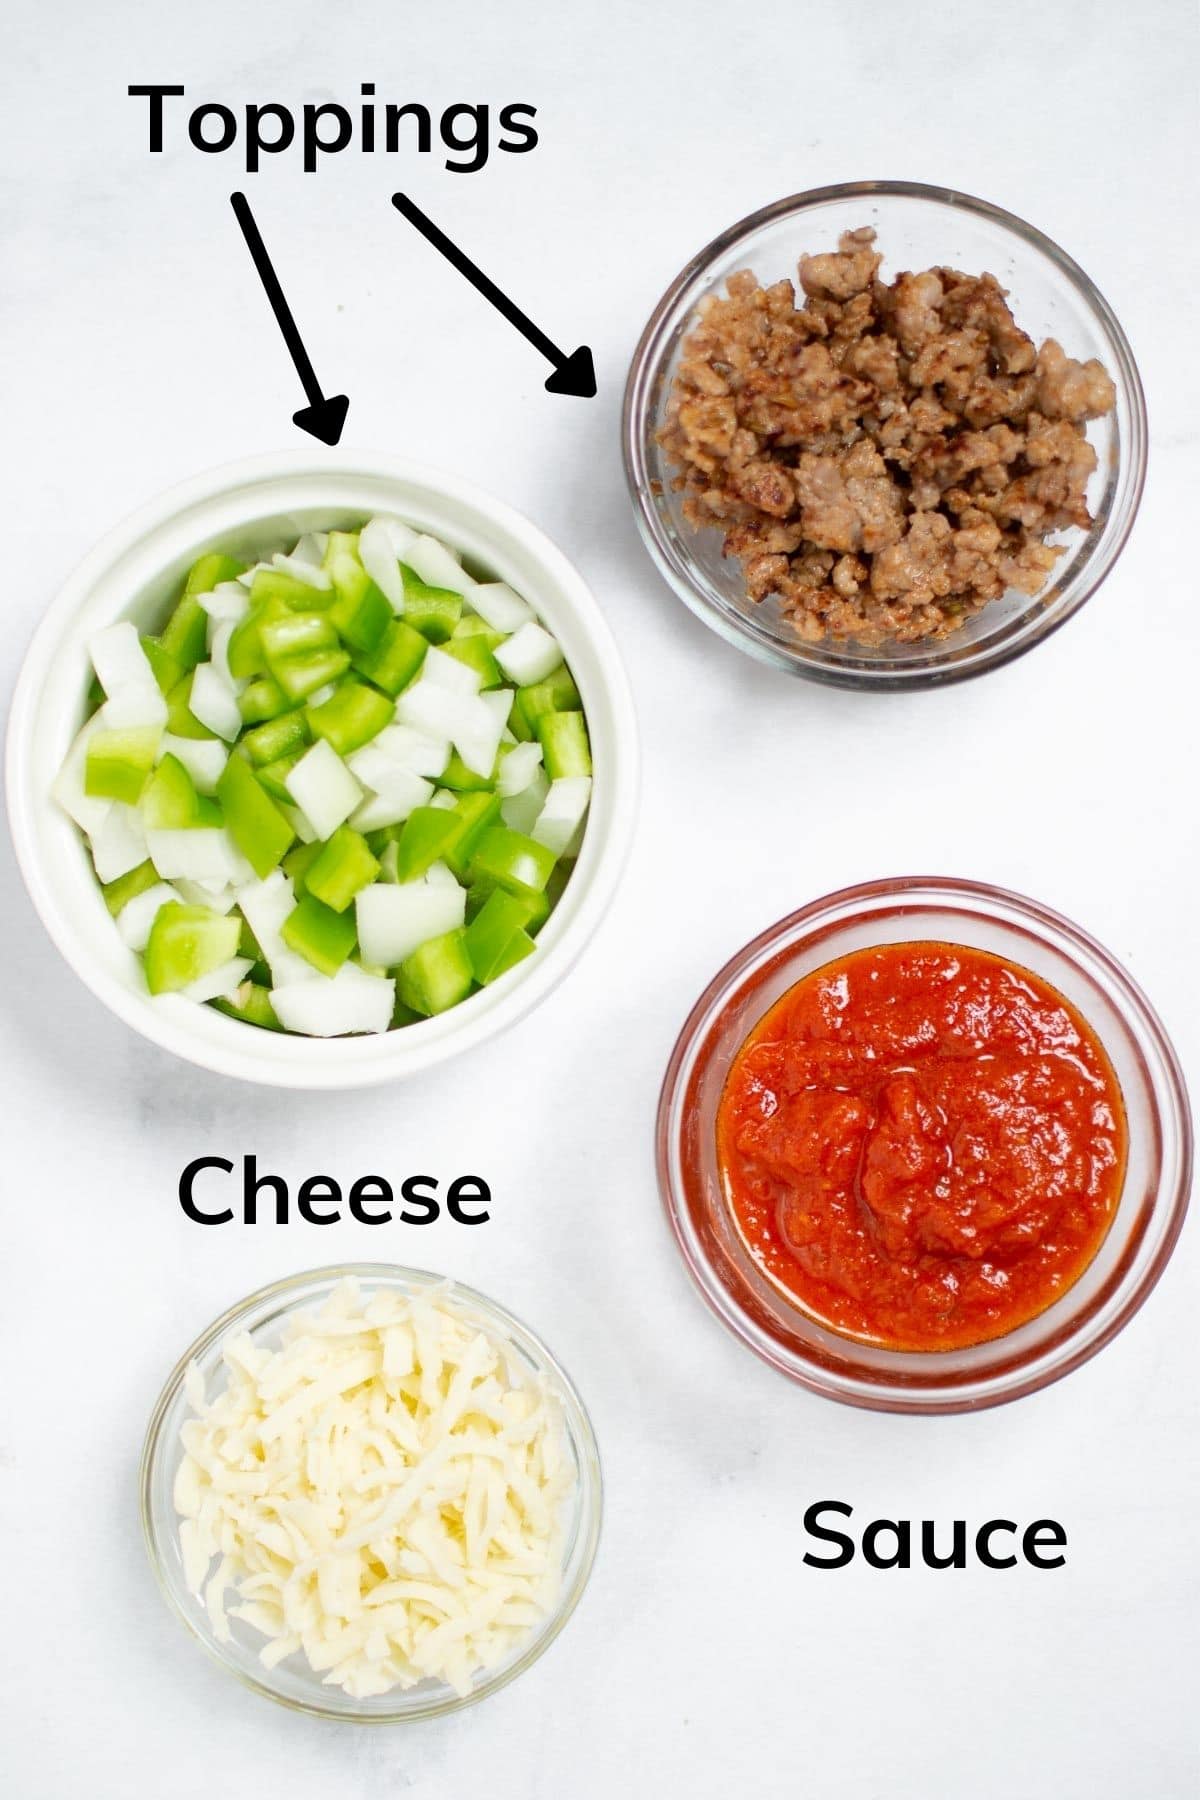 Ingredients needed to make pizza bowl: toppings (sausage and peppers and onions shown), sauce and cheese.